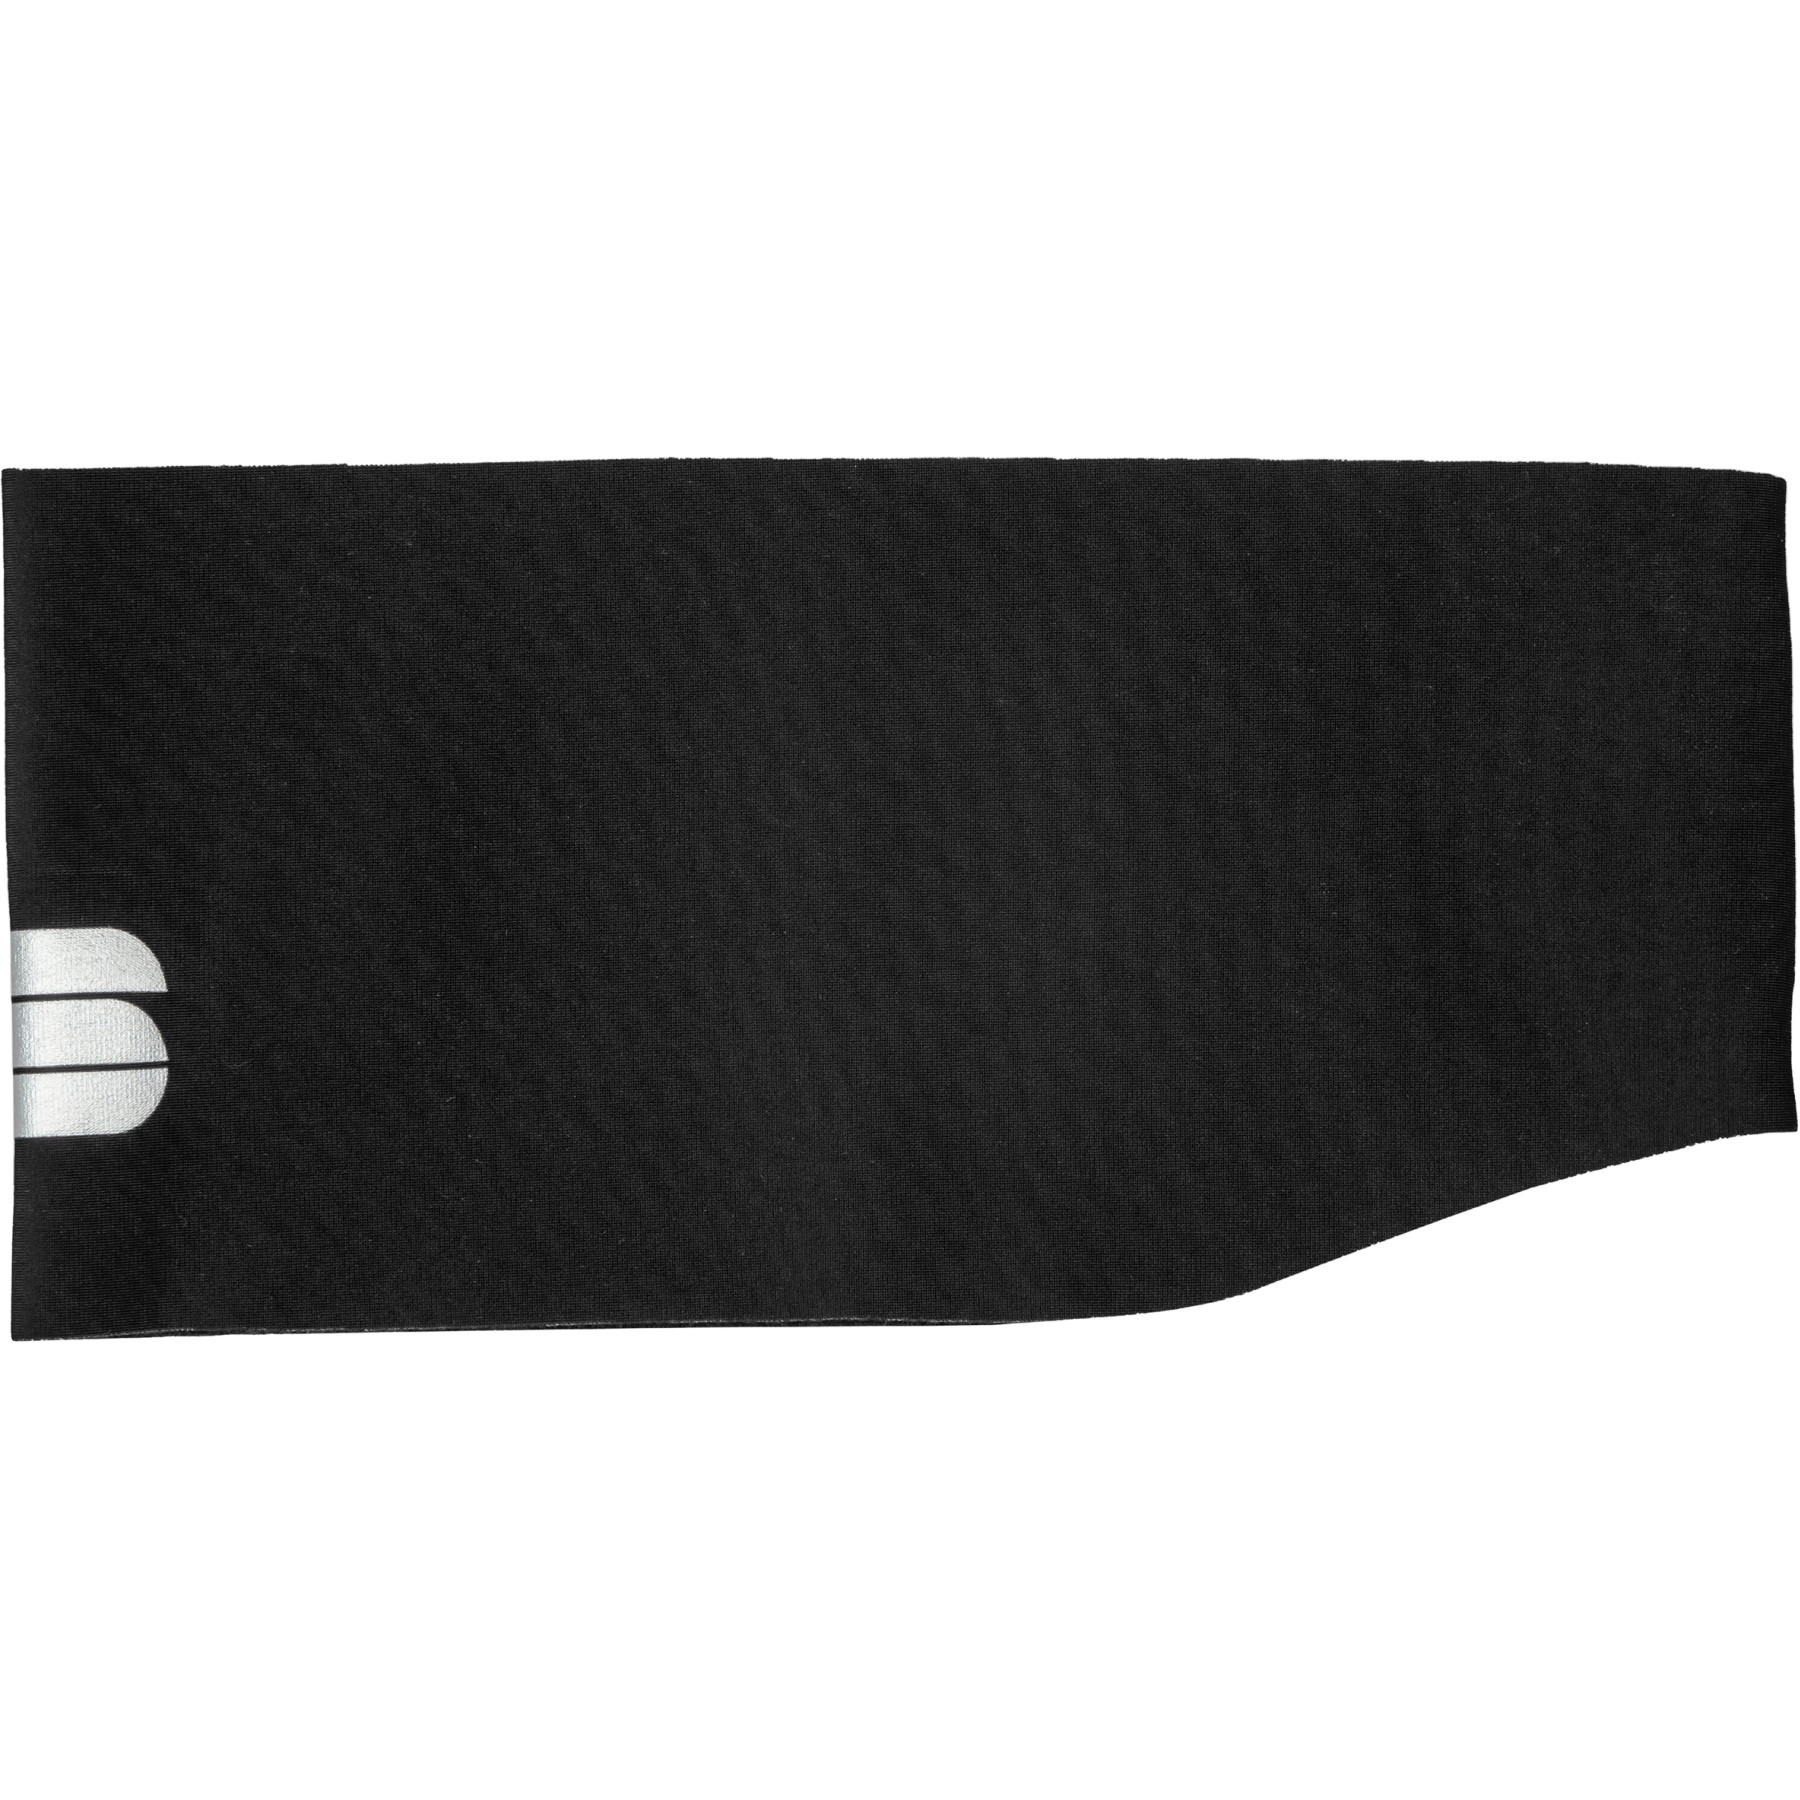 Picture of Sportful Matchy Headband - 002 Black